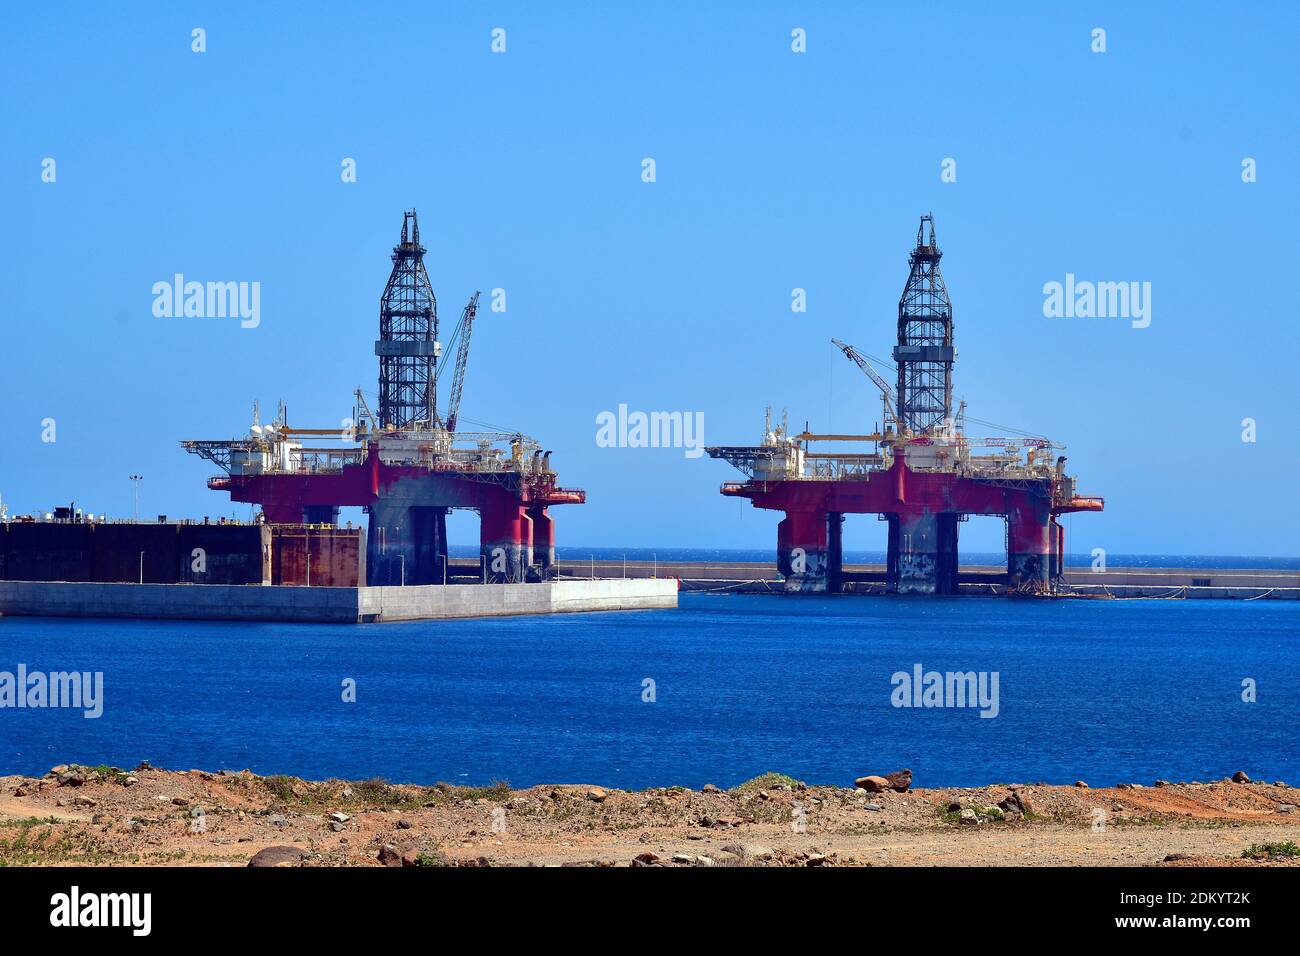 Spain, Canary Islands, offshore platform Stock Photo